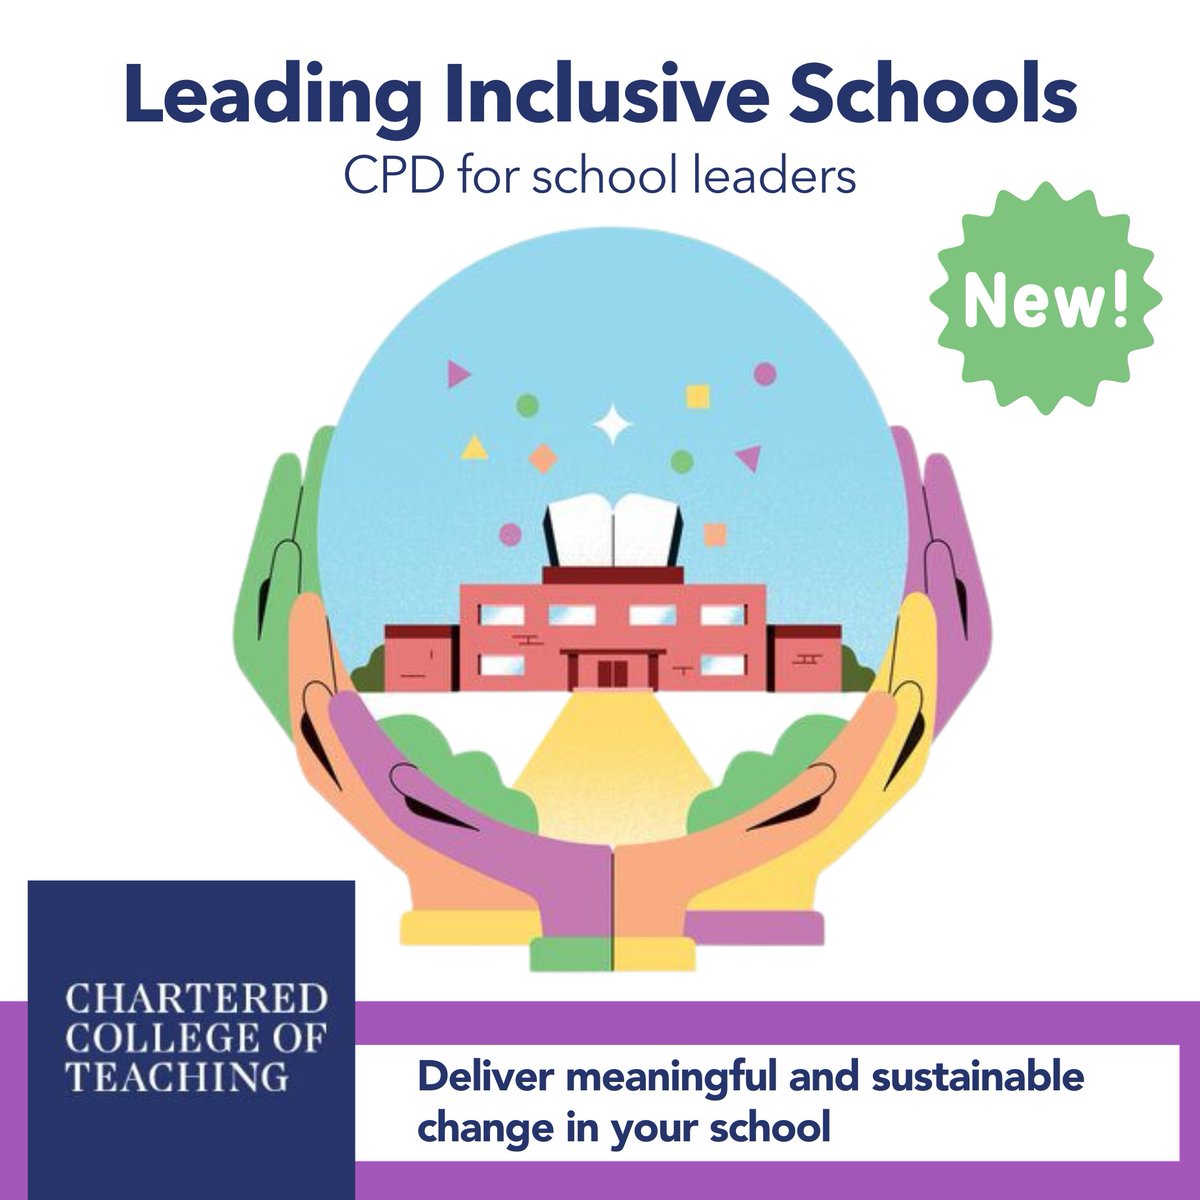 Do you want to deliver meaningful and sustainable change in your school?

Today @CharteredColl launches new CPD to equip school leaders with the knowledge, skills and confidence to enact inclusive leadership:

my.chartered.college/courses/leadin…

#SchoolLeader #InclusiveSchools #DEI #LIS